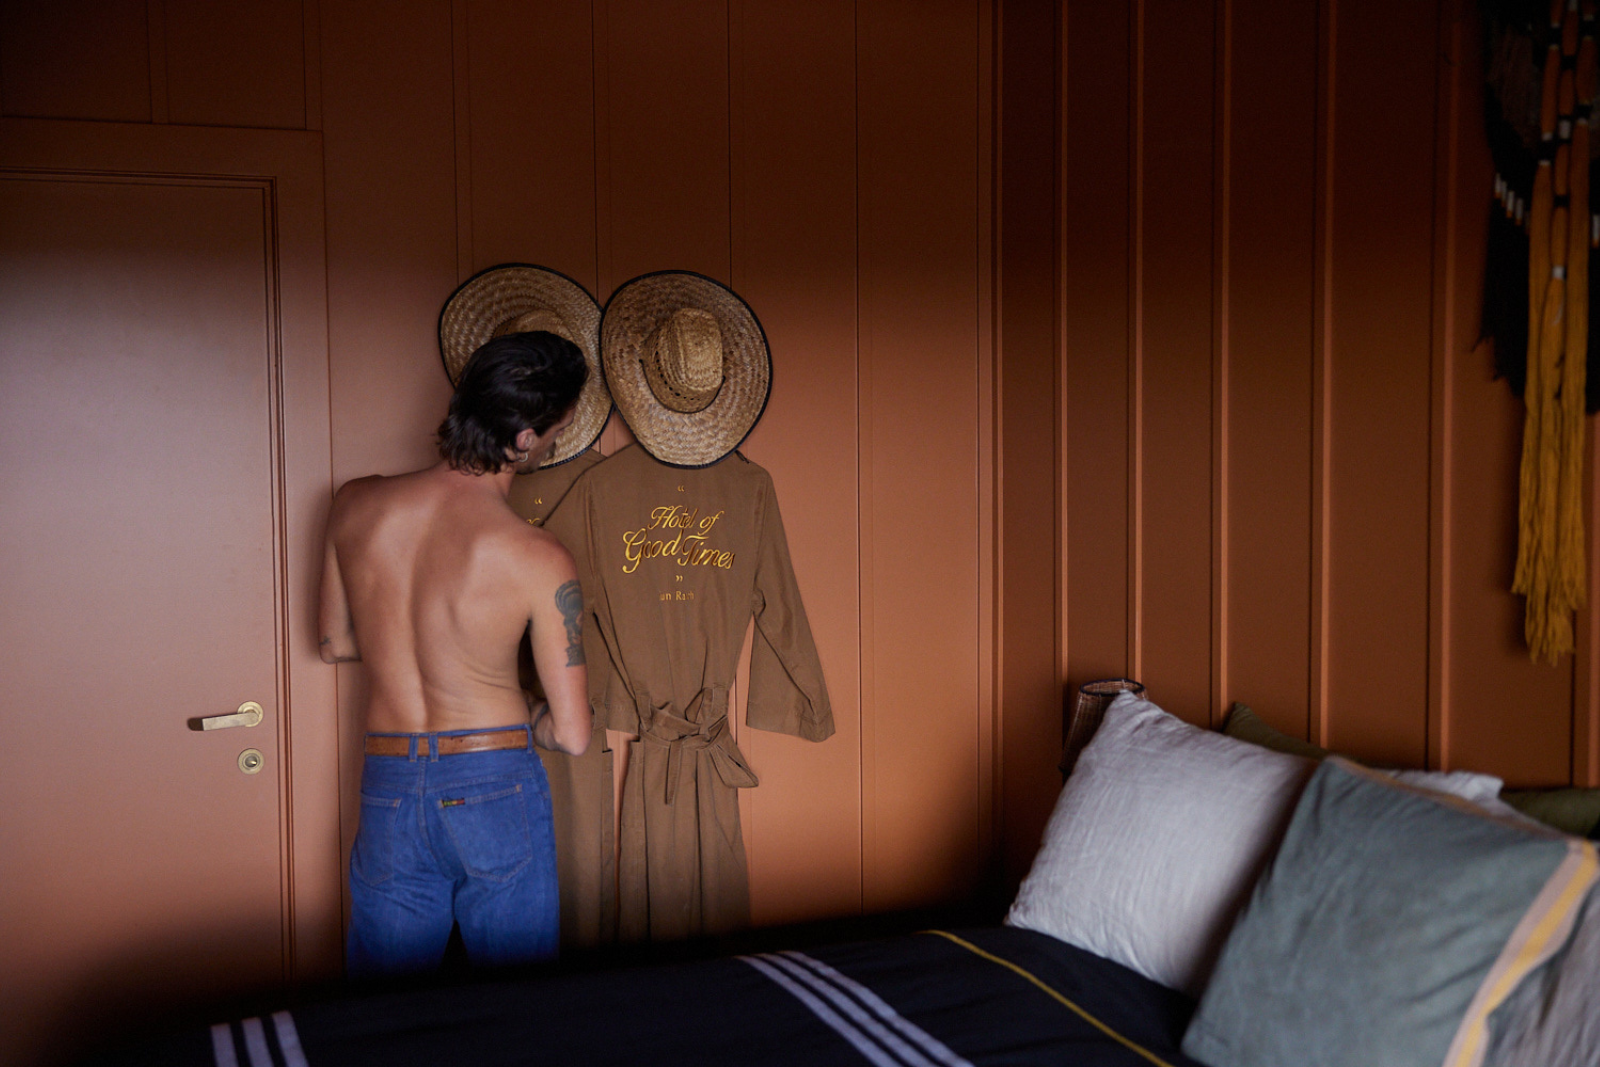 Man with jeans and no shirt facing a burnt orange wall with two tan cotton robes and two cowboy hats hanging on it.